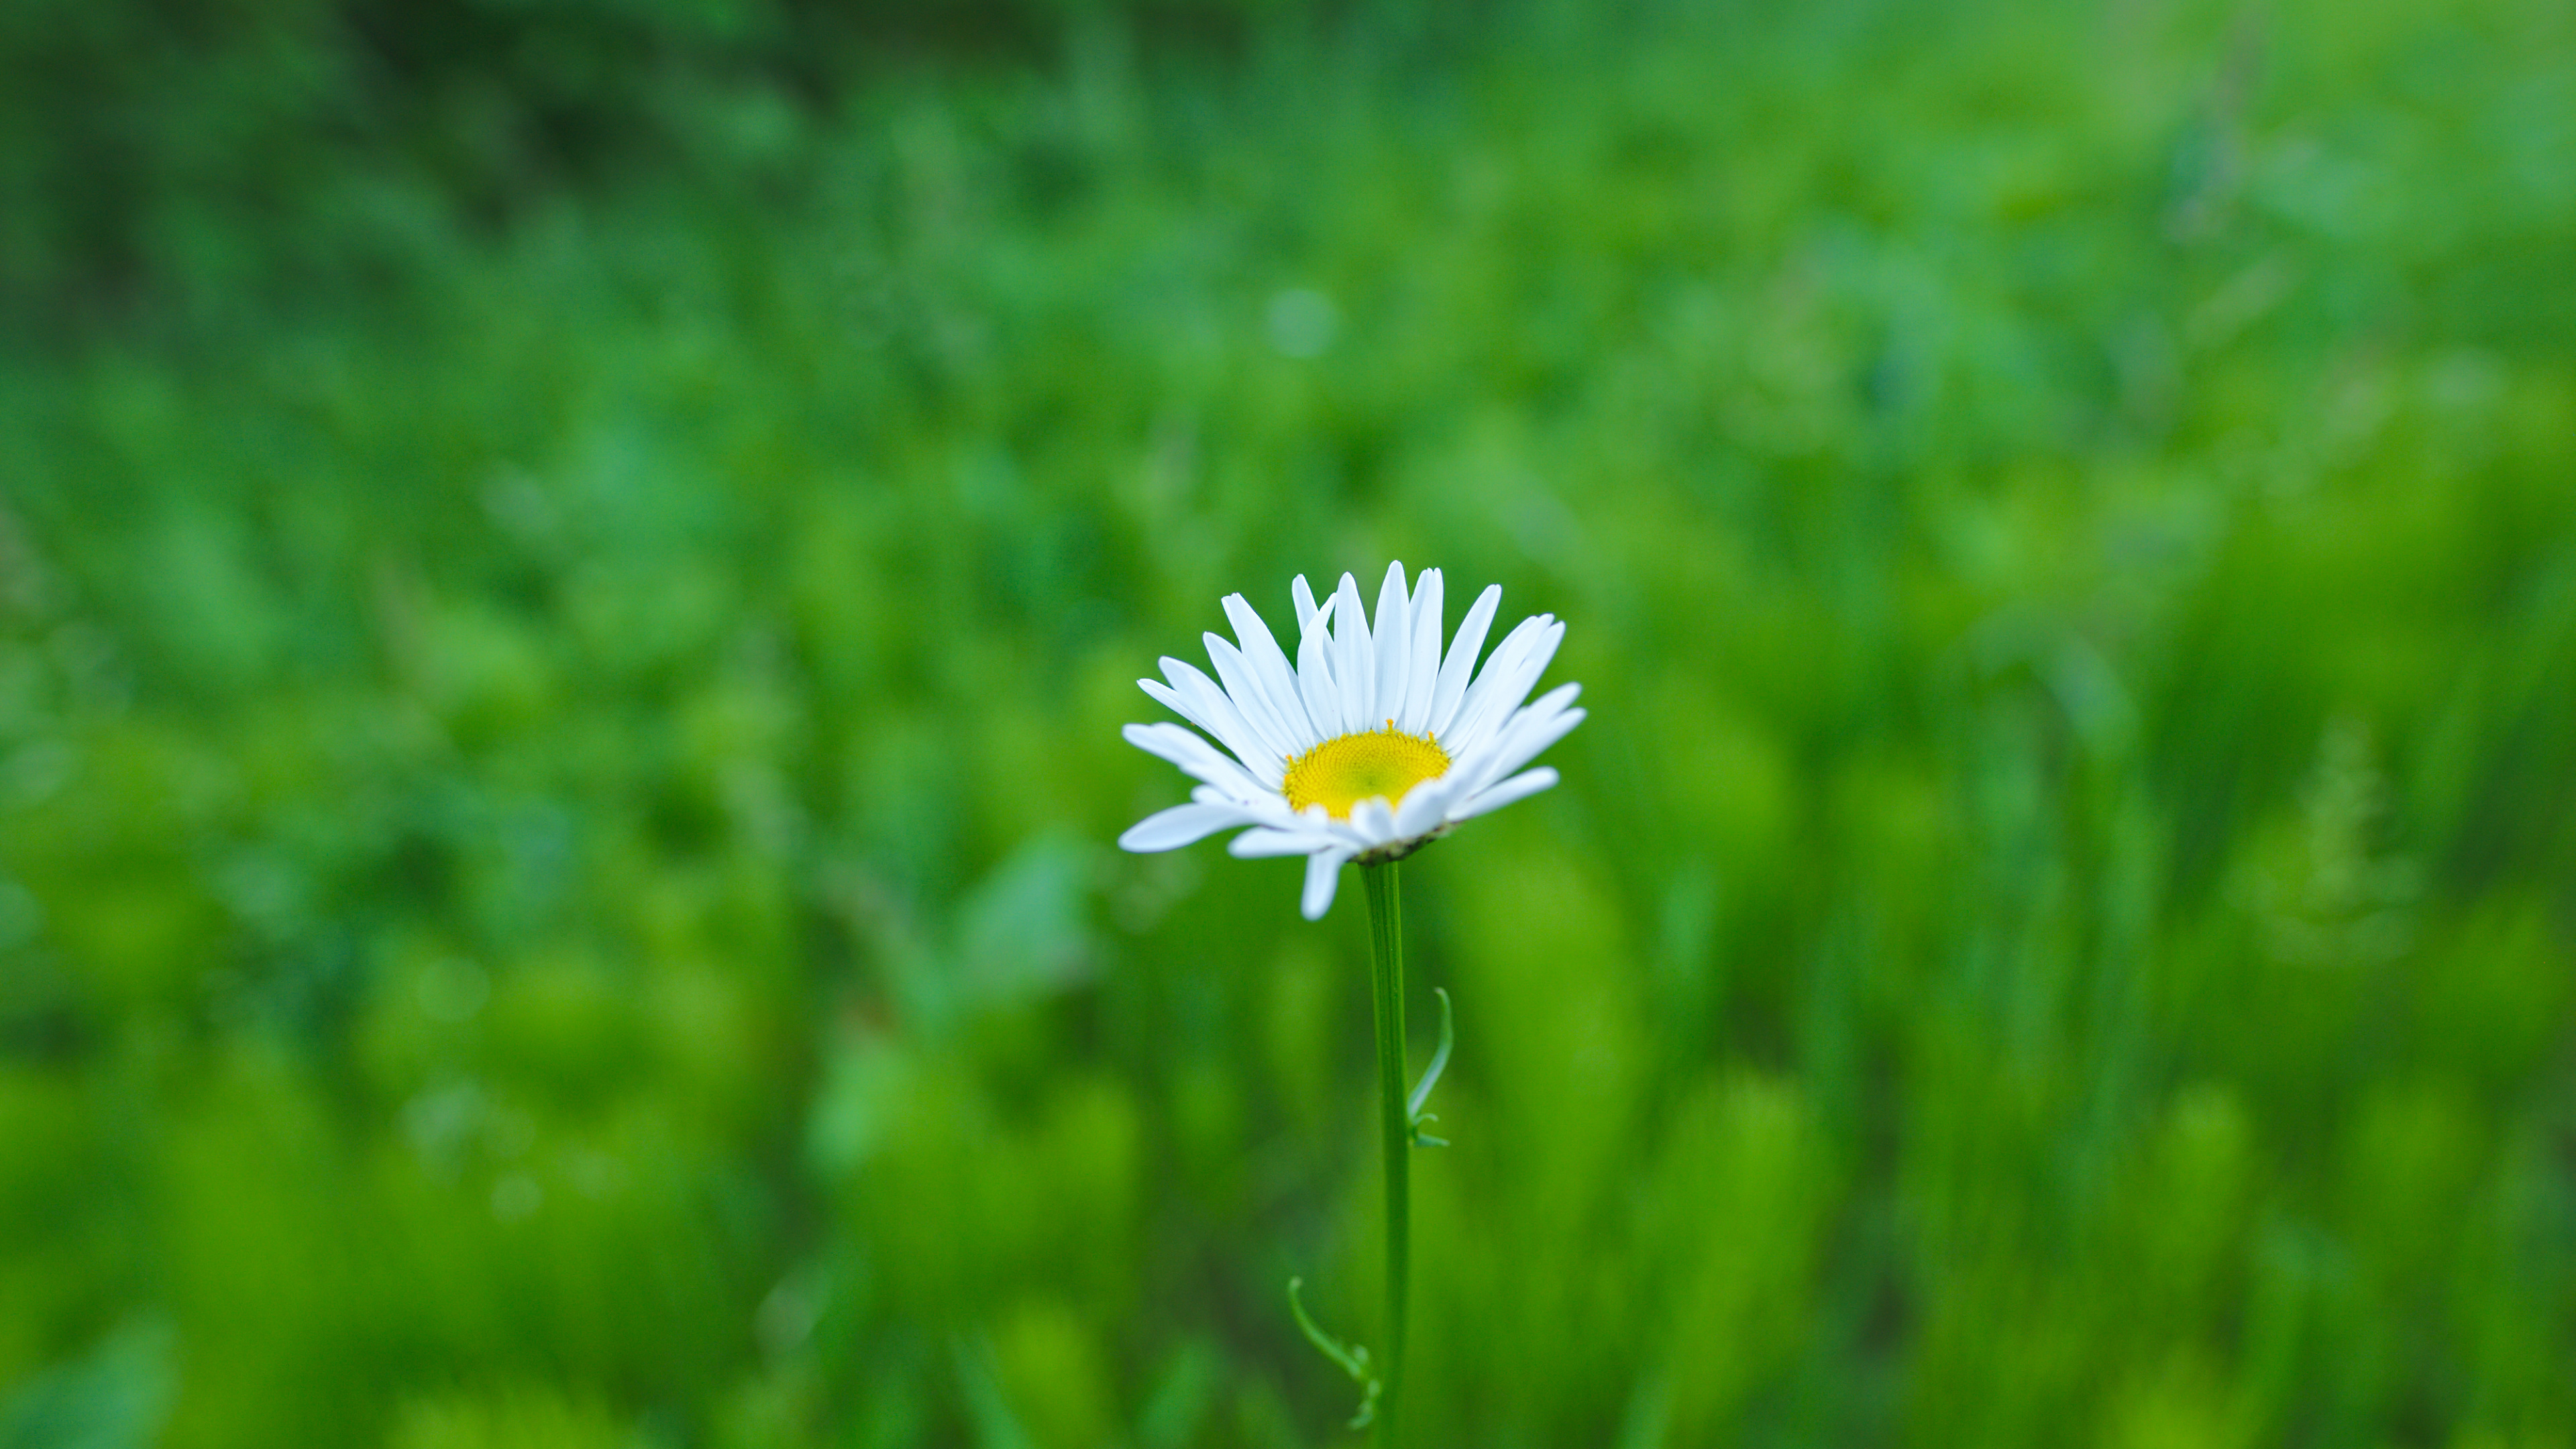 White Daisy in Bloom During Daytime. Wallpaper in 3840x2160 Resolution